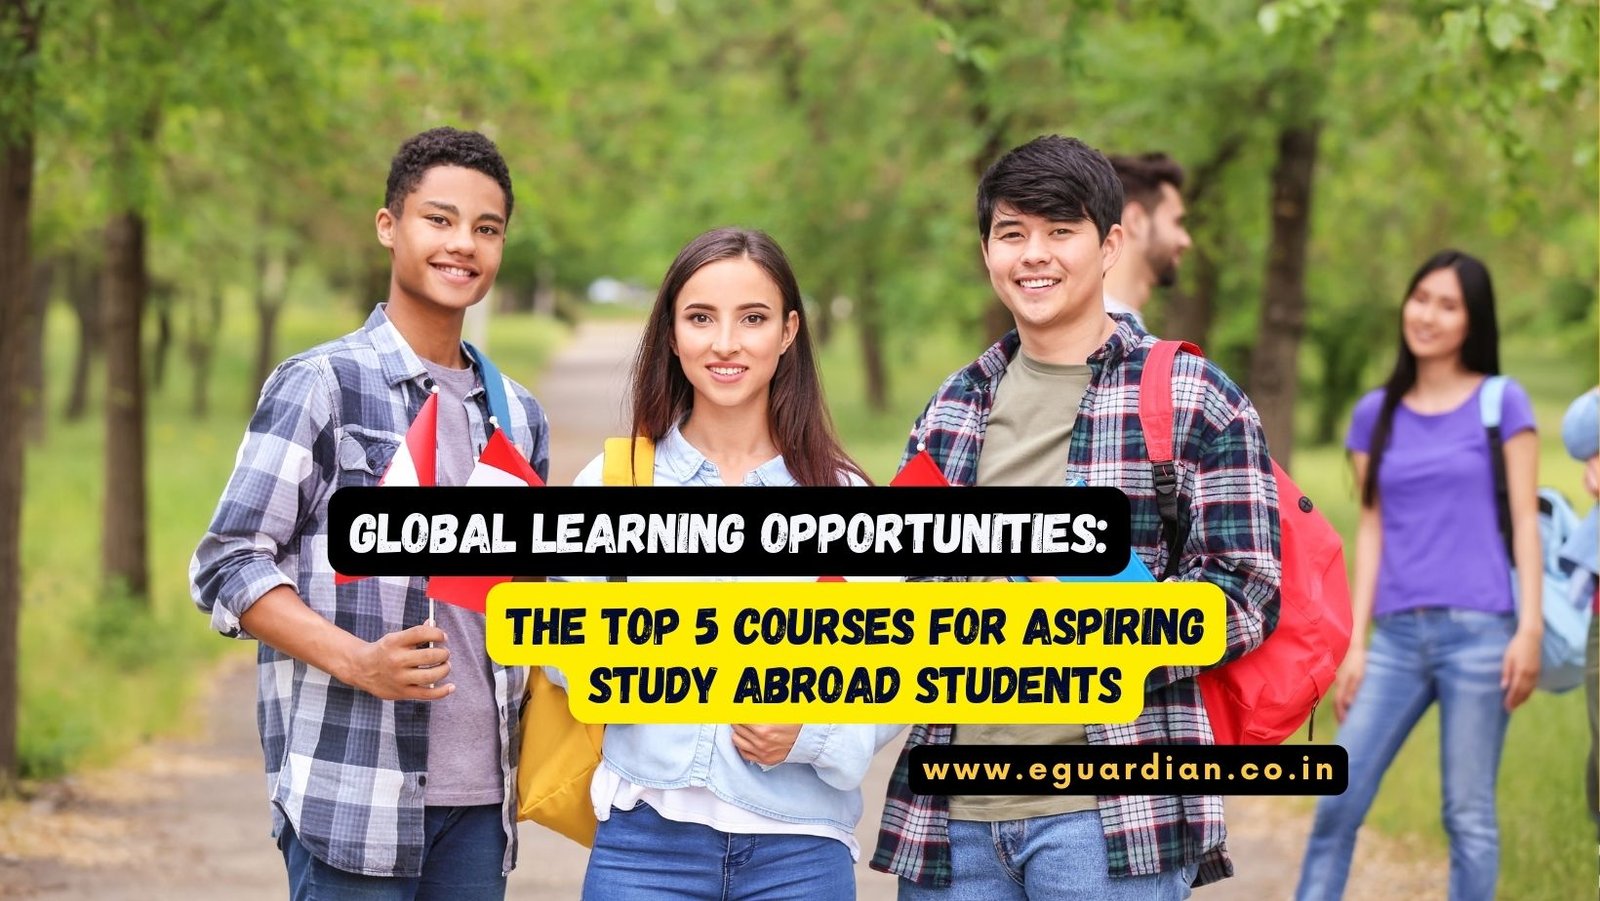 Global Learning Opportunities The Top 5 Courses for Aspiring Study Abroad Students